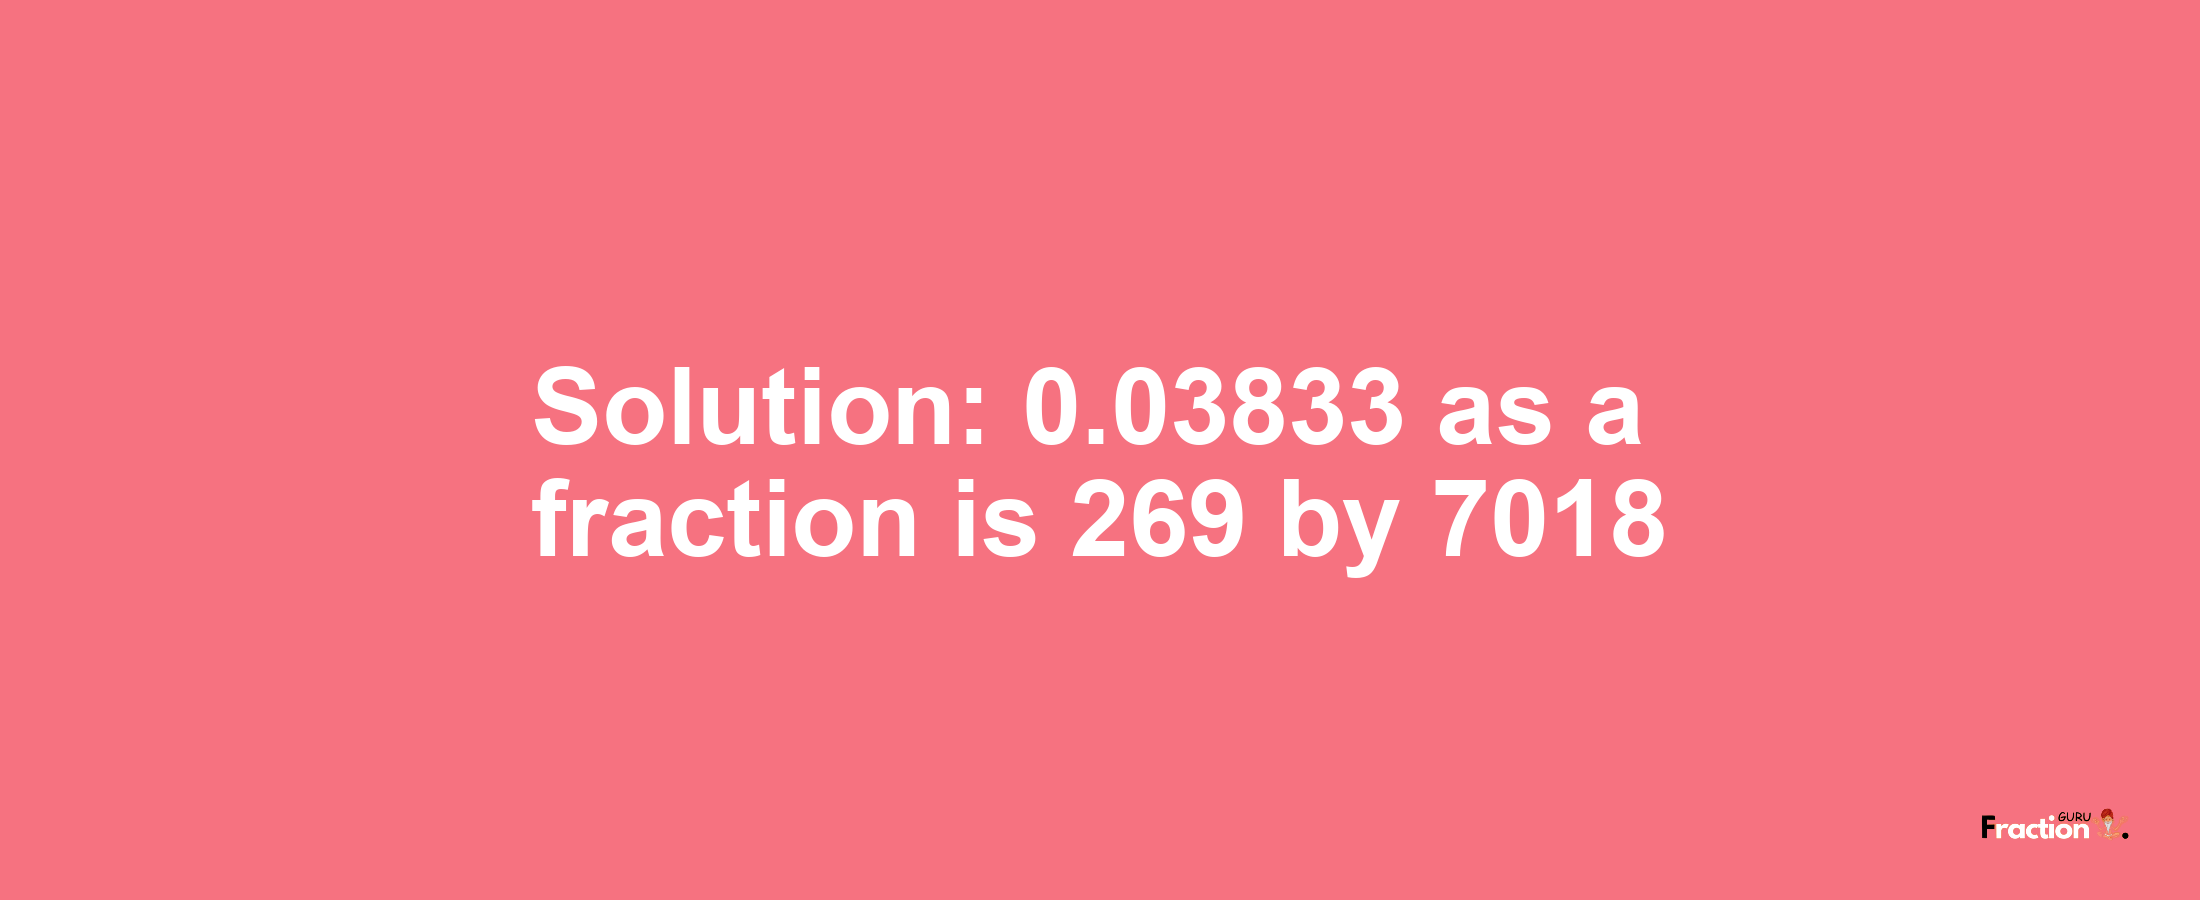 Solution:0.03833 as a fraction is 269/7018